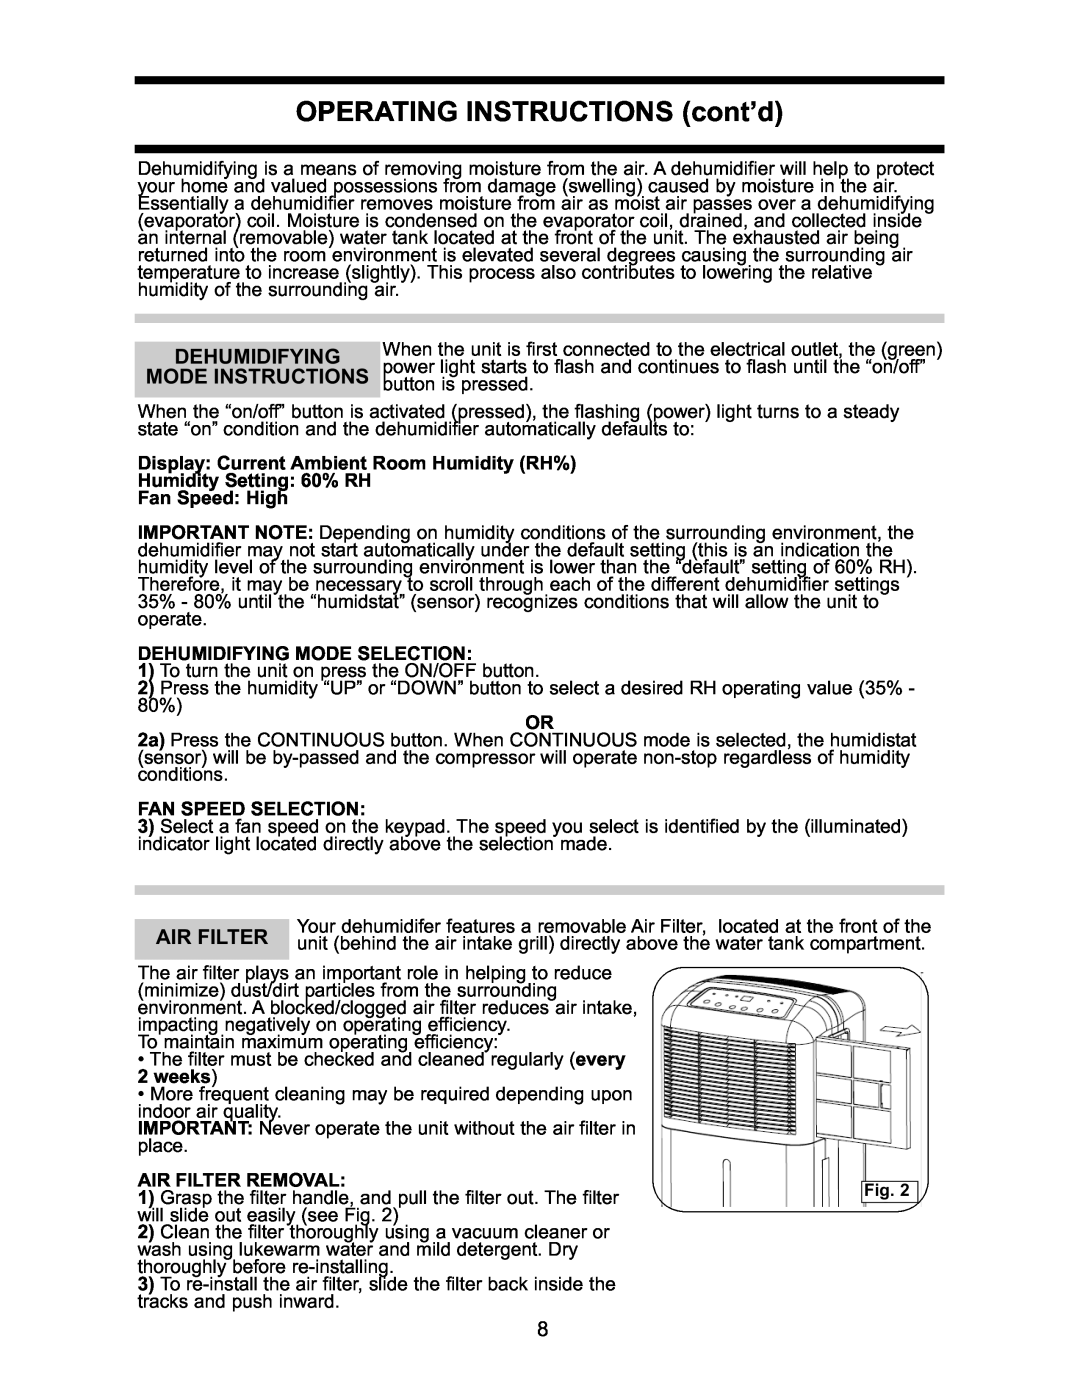 Danby DDR2509EE OPERATING INSTRUCTIONS cont’d, Display Current Ambient Room Humidity RH%, Dehumidifying Mode Selection 